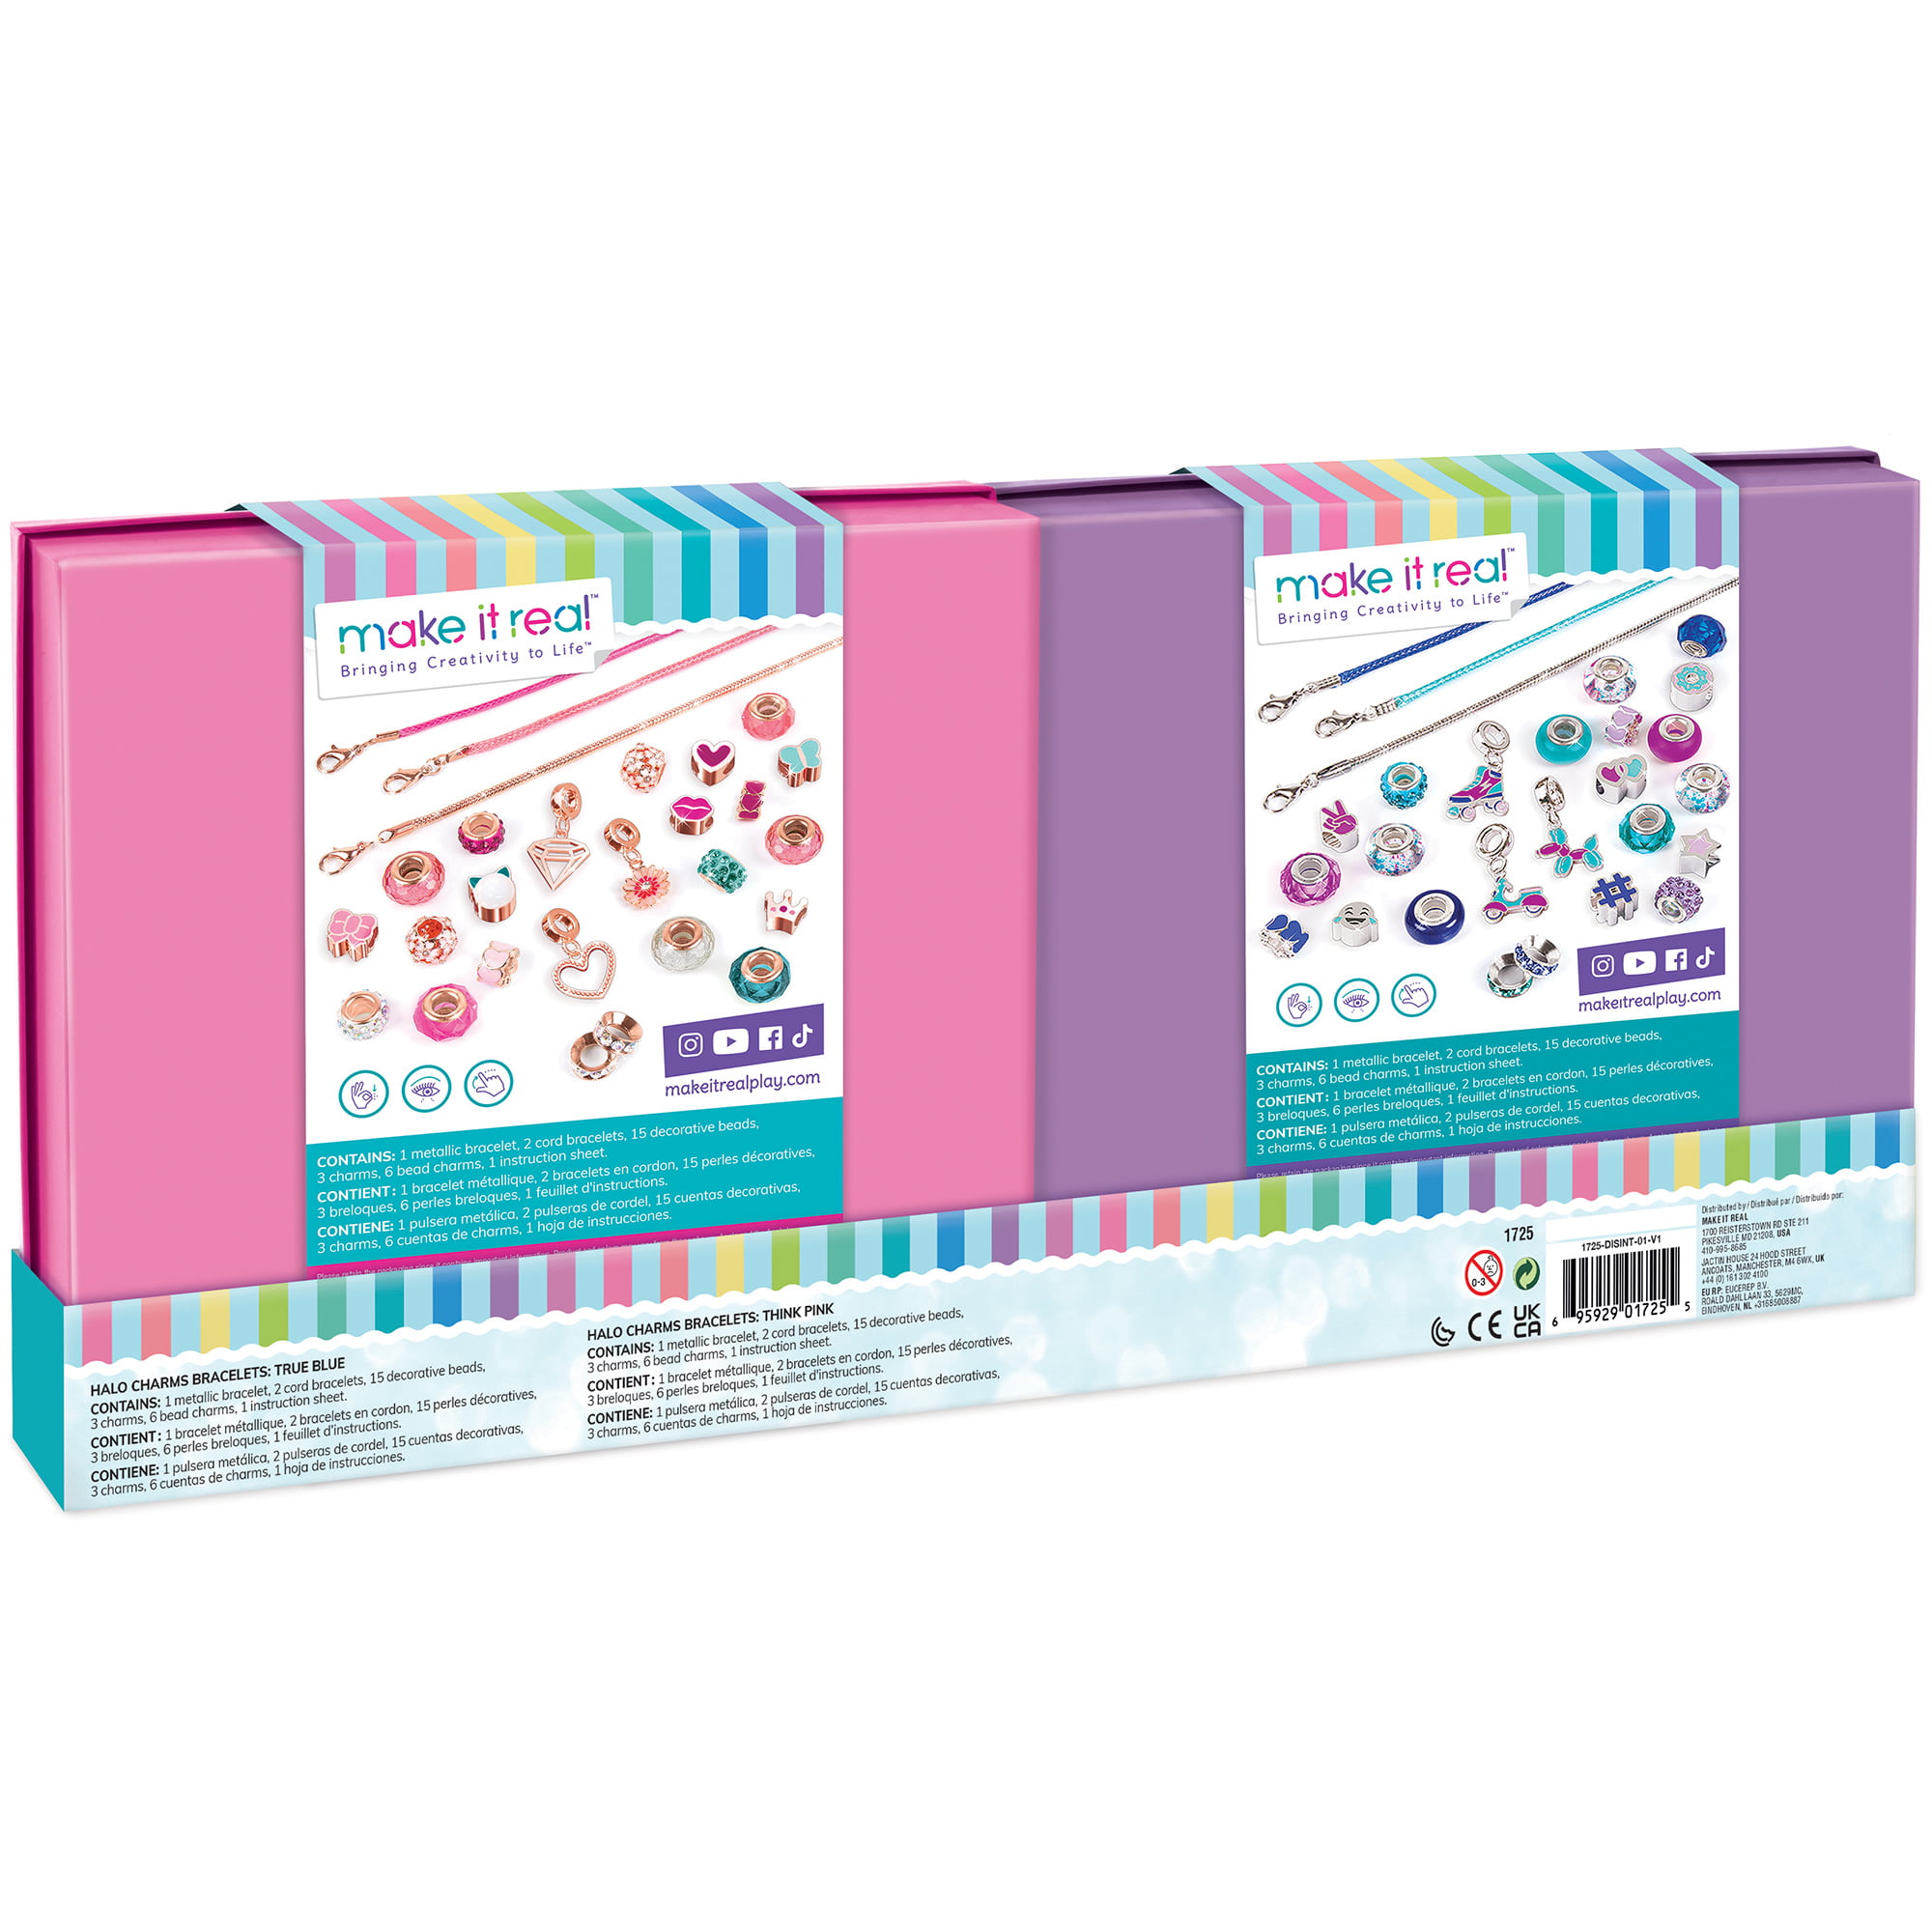 Make It Real: Halo Charms 2-in-1 True Blue & Think Pink DIY Jewelry Kit -  Create 6 Bracelets, 56 Pieces, Tweens & Girls Ages 8+ 